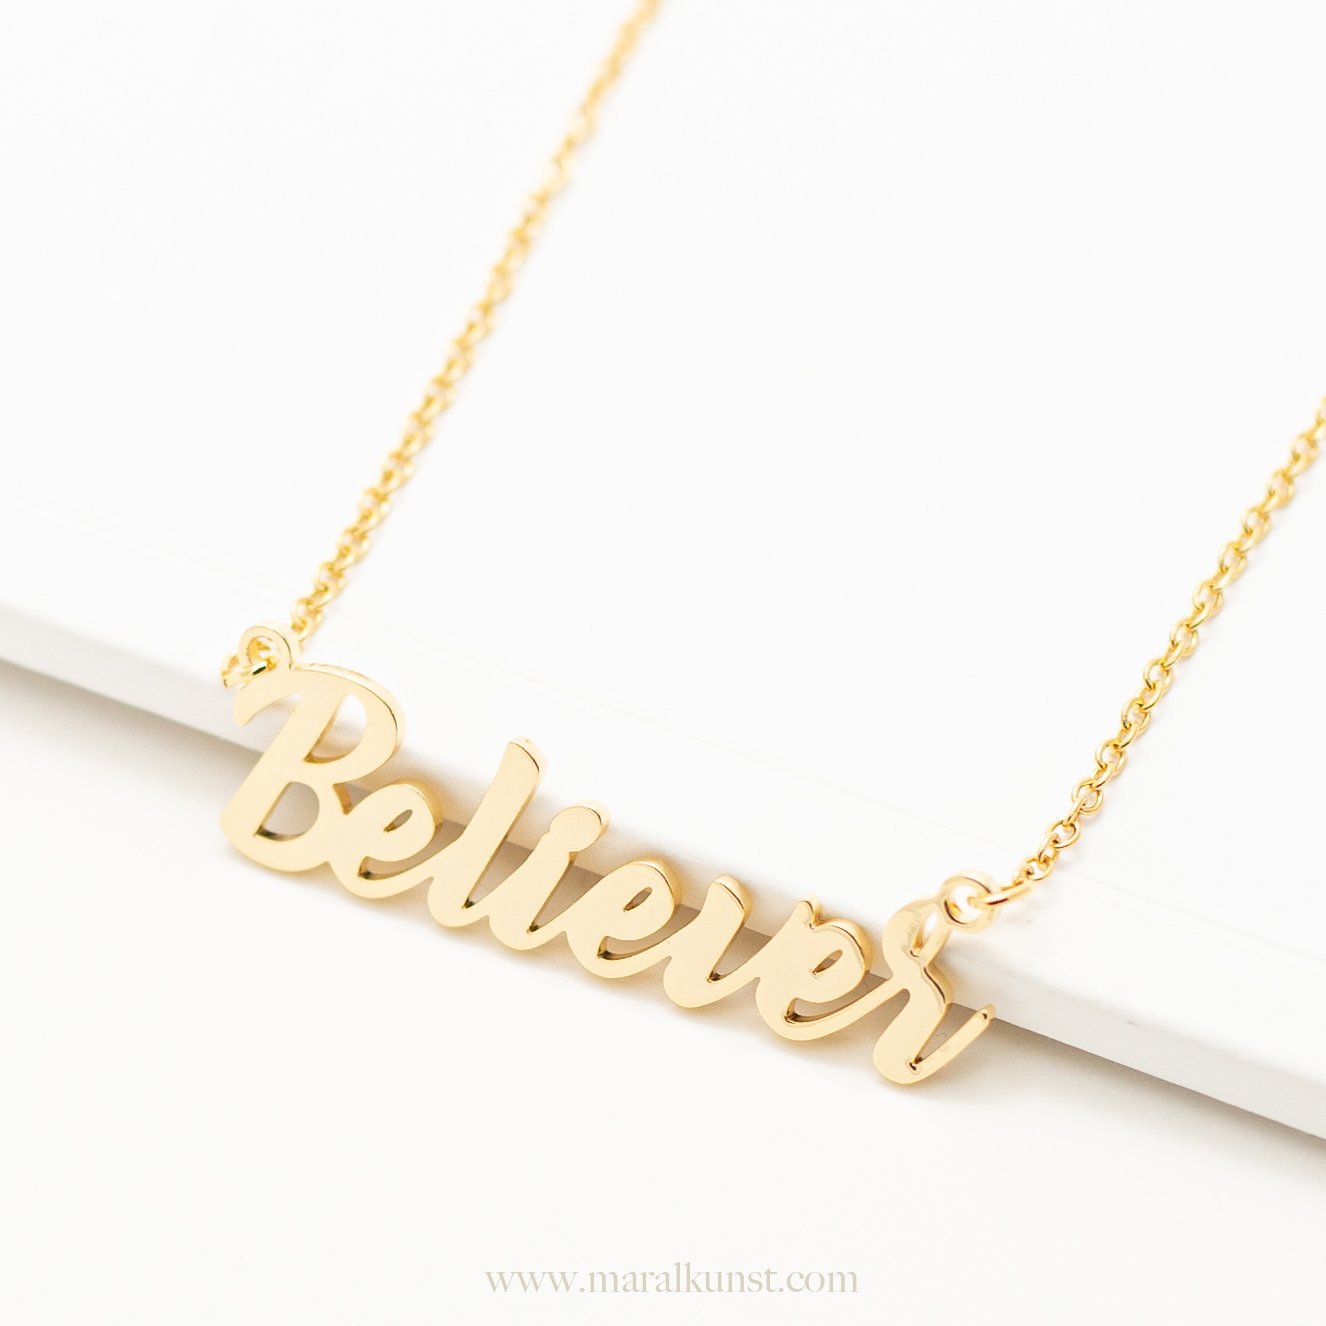 Believer Calligraphy Gold Necklace - Maral Kunst Jewelry